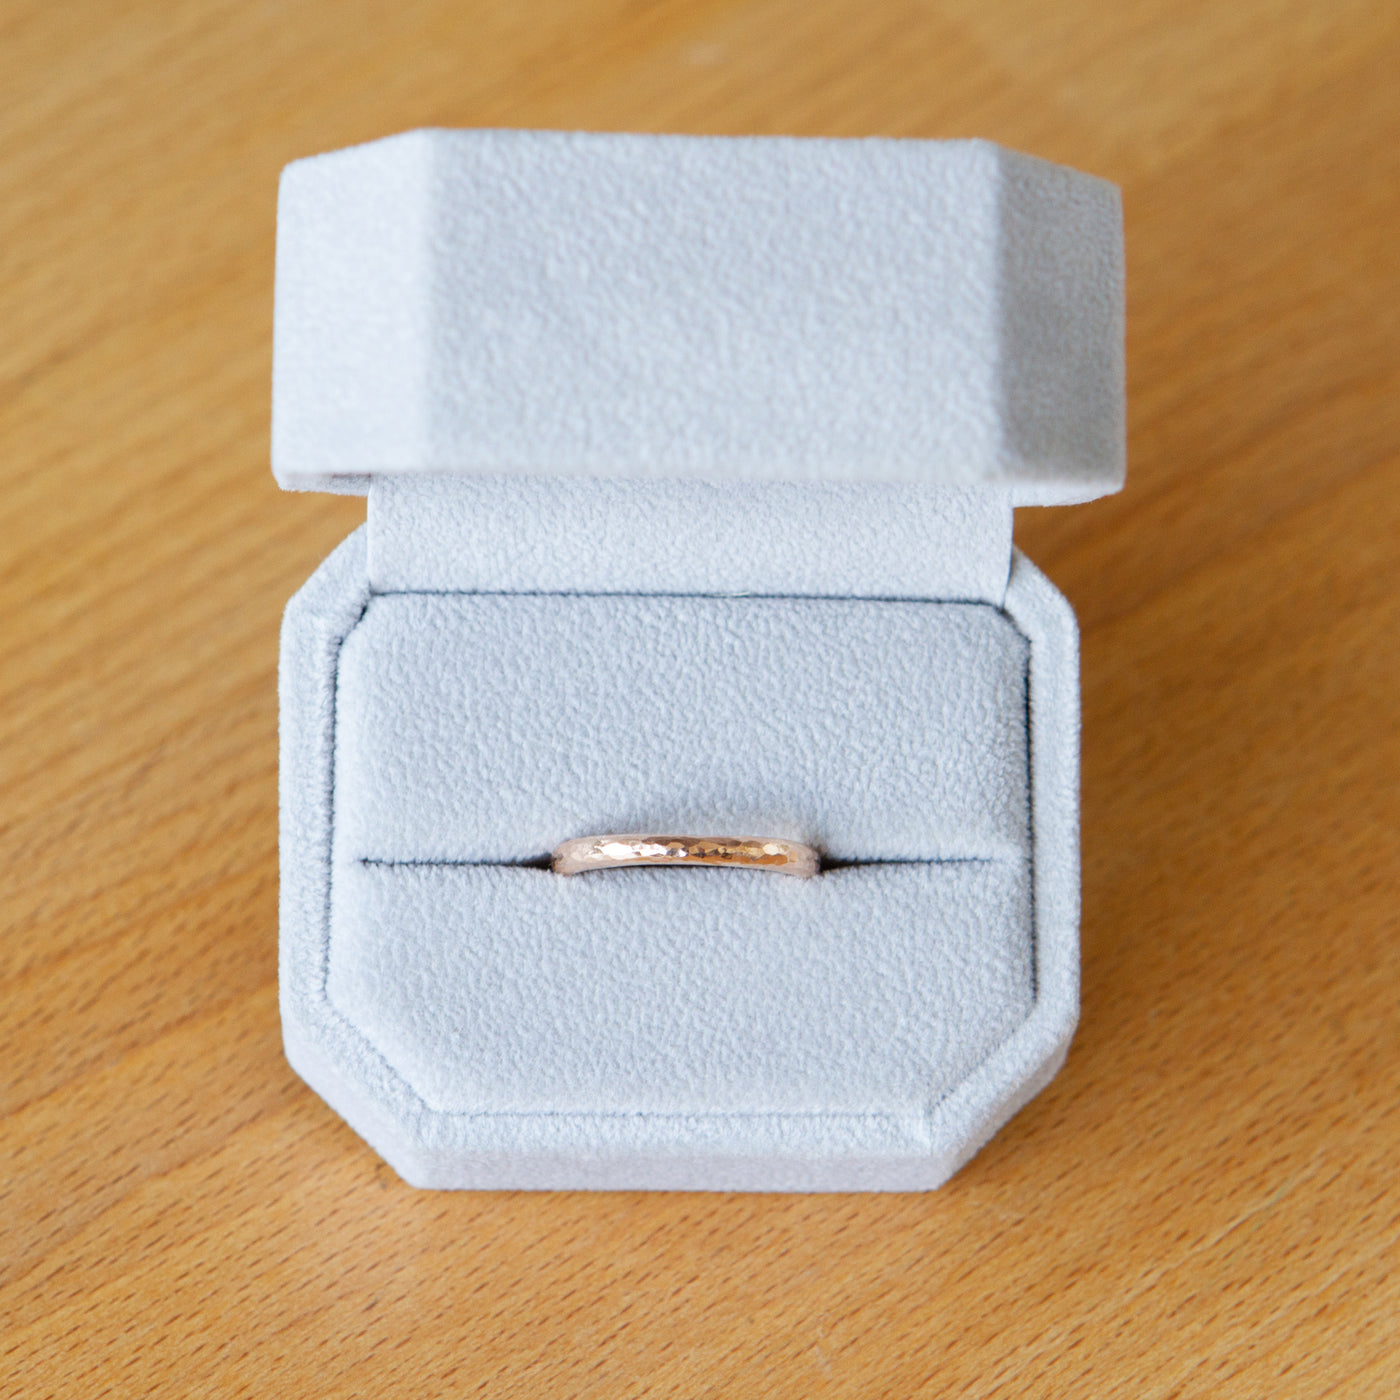 14k rose gold blue ridge half round hammered band in a ring box by Corey Egan